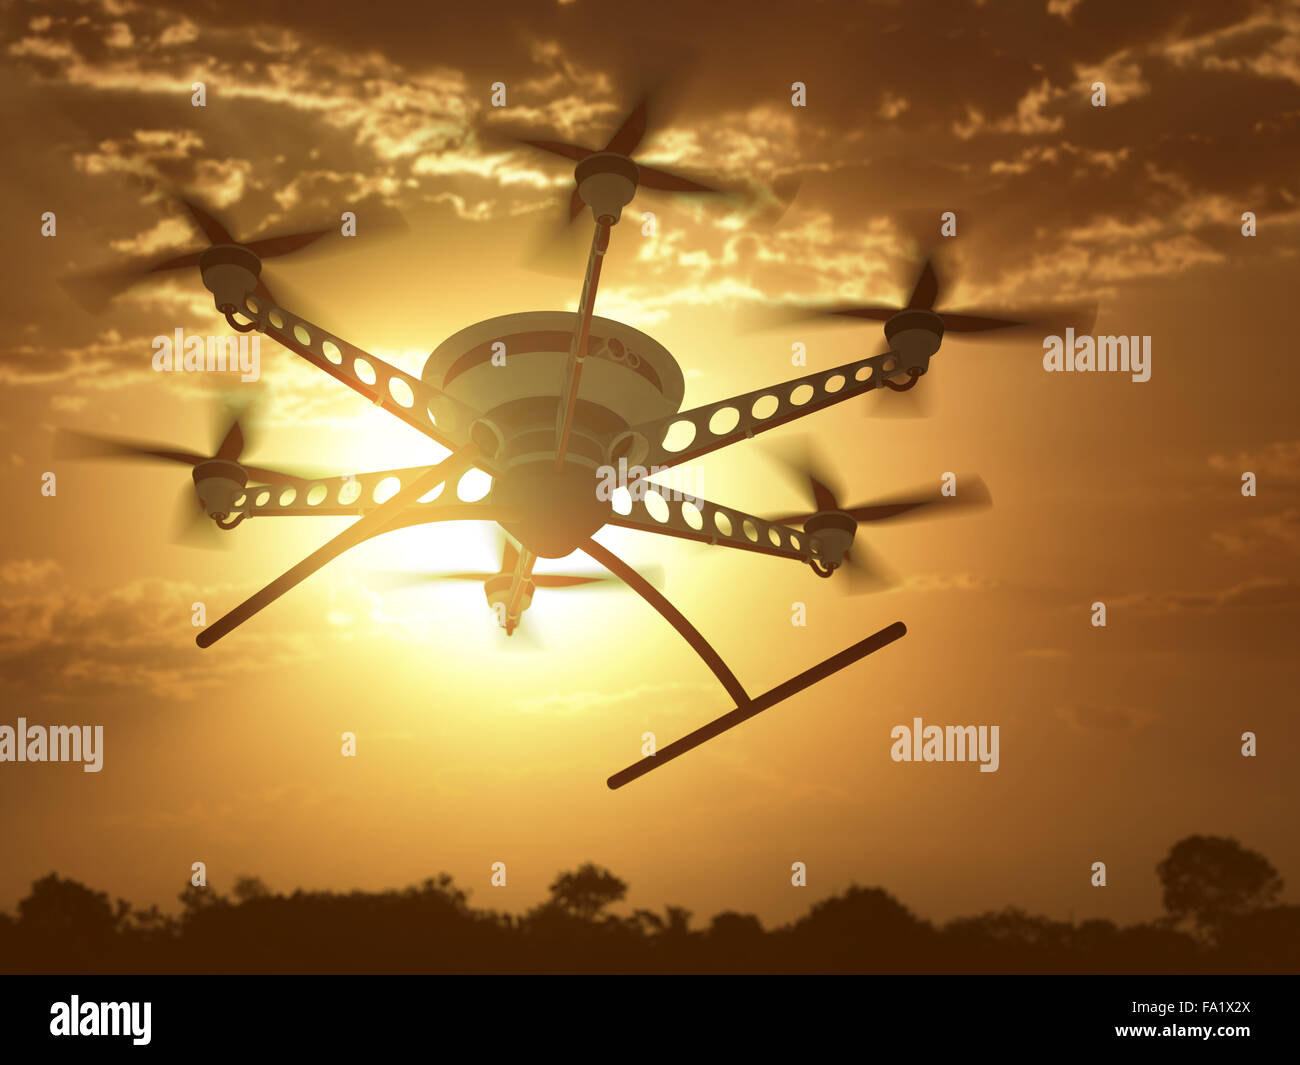 Drone flying under the sunset and cloudy sky. Stock Photo